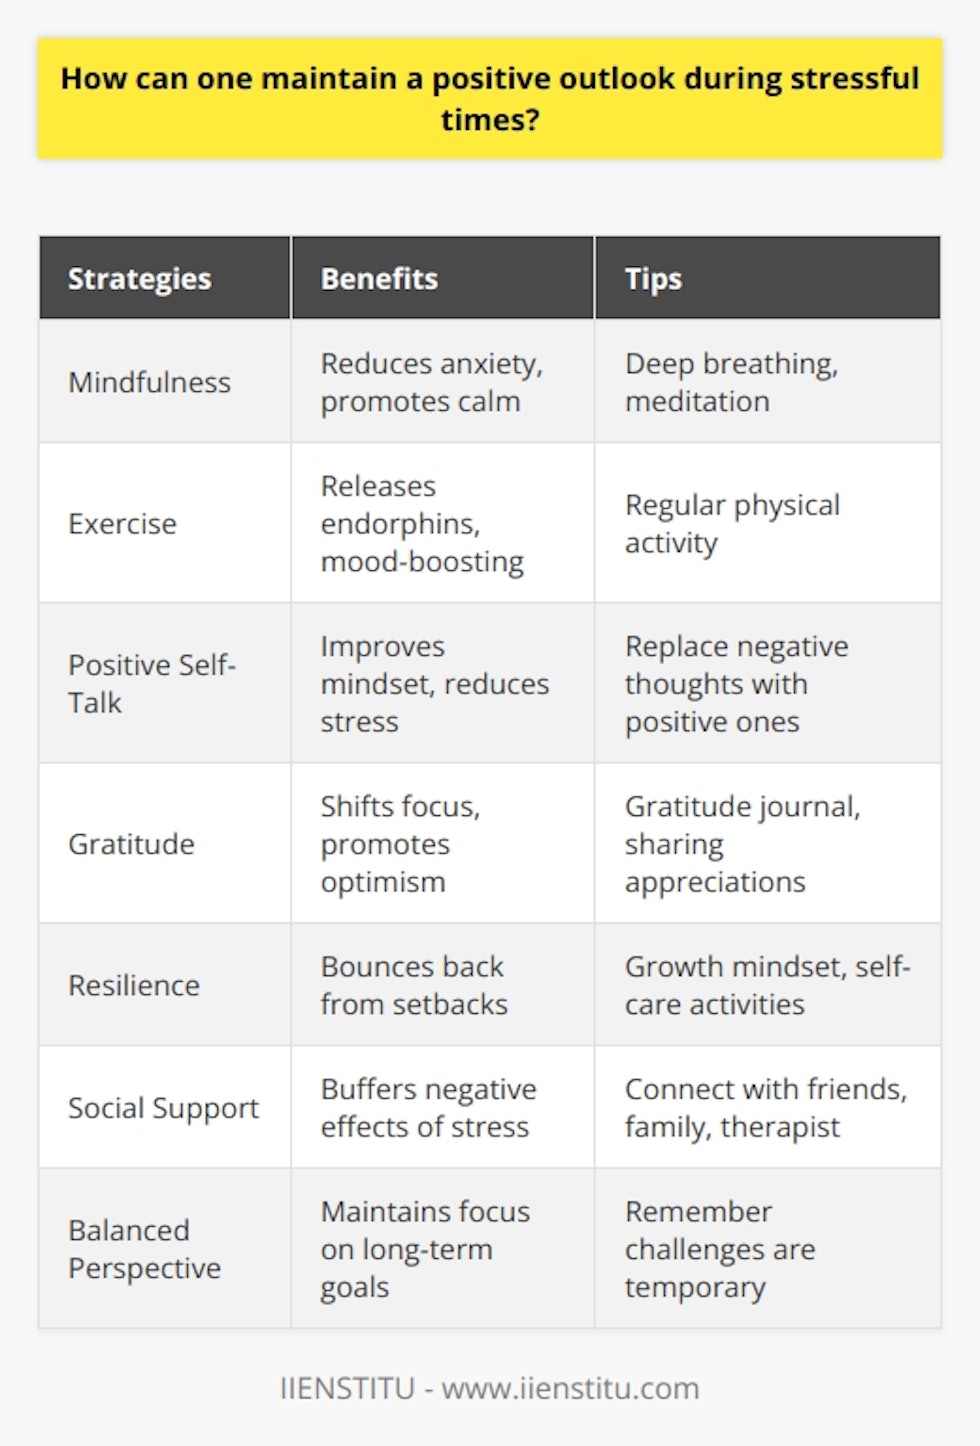 Maintaining a positive outlook during stressful times is crucial for overall well-being and mental health. One effective way to achieve this is by focusing on the present moment and practicing mindfulness. Engaging in mindfulness techniques, such as deep breathing and meditation, can help reduce anxiety and promote a sense of calm. Additionally, regular exercise has been shown to release endorphins, which are natural mood-boosters that can help alleviate stress and improve overall mood. The Power of Positive Self-Talk Another key strategy for maintaining a positive outlook is to engage in positive self-talk. This involves consciously replacing negative thoughts with more optimistic and constructive ones. By challenging negative self-talk and reframing thoughts in a more positive light, individuals can improve their overall mindset and reduce stress levels. It is also important to surround oneself with supportive and positive individuals who can provide encouragement and help maintain a positive perspective. Cultivating Gratitude and Resilience Cultivating gratitude is another powerful tool for maintaining a positive outlook during challenging times. Taking time each day to reflect on the things one is thankful for can help shift focus away from stressors and promote a more optimistic mindset. Keeping a gratitude journal or sharing appreciations with others can further reinforce feelings of positivity and contentment. Building resilience is also essential for maintaining a positive outlook in the face of adversity. Resilience refers to the ability to bounce back from setbacks and adapt to changing circumstances. Developing a growth mindset, which views challenges as opportunities for learning and personal growth, can help foster resilience. Engaging in activities that promote self-care, such as hobbies, social connections, and adequate sleep, can also contribute to building resilience and maintaining a positive outlook. Seeking Support and Maintaining Perspective The Importance of Social Connections During stressful times, it is important to seek support from others. Connecting with friends, family, or a therapist can provide a safe space to express feelings and receive guidance and encouragement. Social support has been shown to buffer the negative effects of stress and promote overall well-being. Maintaining a Balanced Perspective Finally, maintaining a balanced perspective is crucial for preserving a positive outlook during stressful periods. It is important to remember that stressful situations are often temporary and that there are always opportunities for growth and learning. Focusing on the bigger picture and keeping long-term goals in mind can help put current challenges into perspective and provide motivation to persevere. Conclusion In summary, maintaining a positive outlook during stressful times requires a combination of mindfulness, positive self-talk, gratitude, resilience, social support, and perspective. By incorporating these strategies into daily life, individuals can effectively manage stress, improve overall well-being, and maintain a positive mindset in the face of challenges.